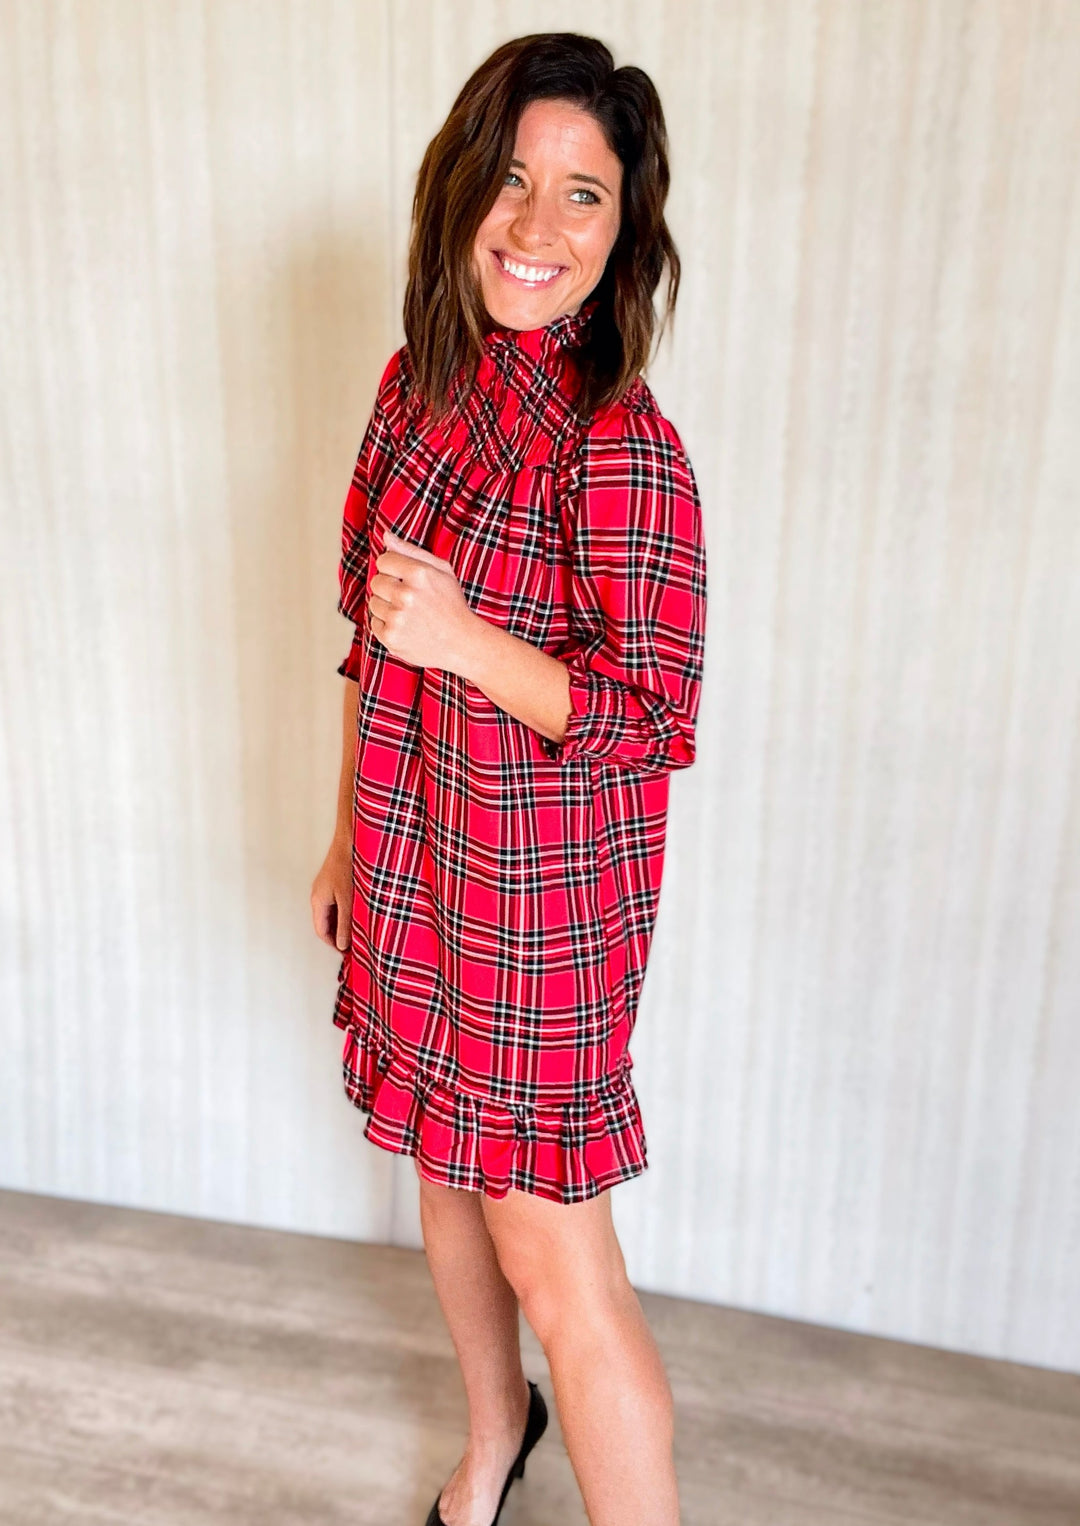 Holiday Dresses & Dresses for Christmas - Women's Red Plaid Smocked Neck Dress